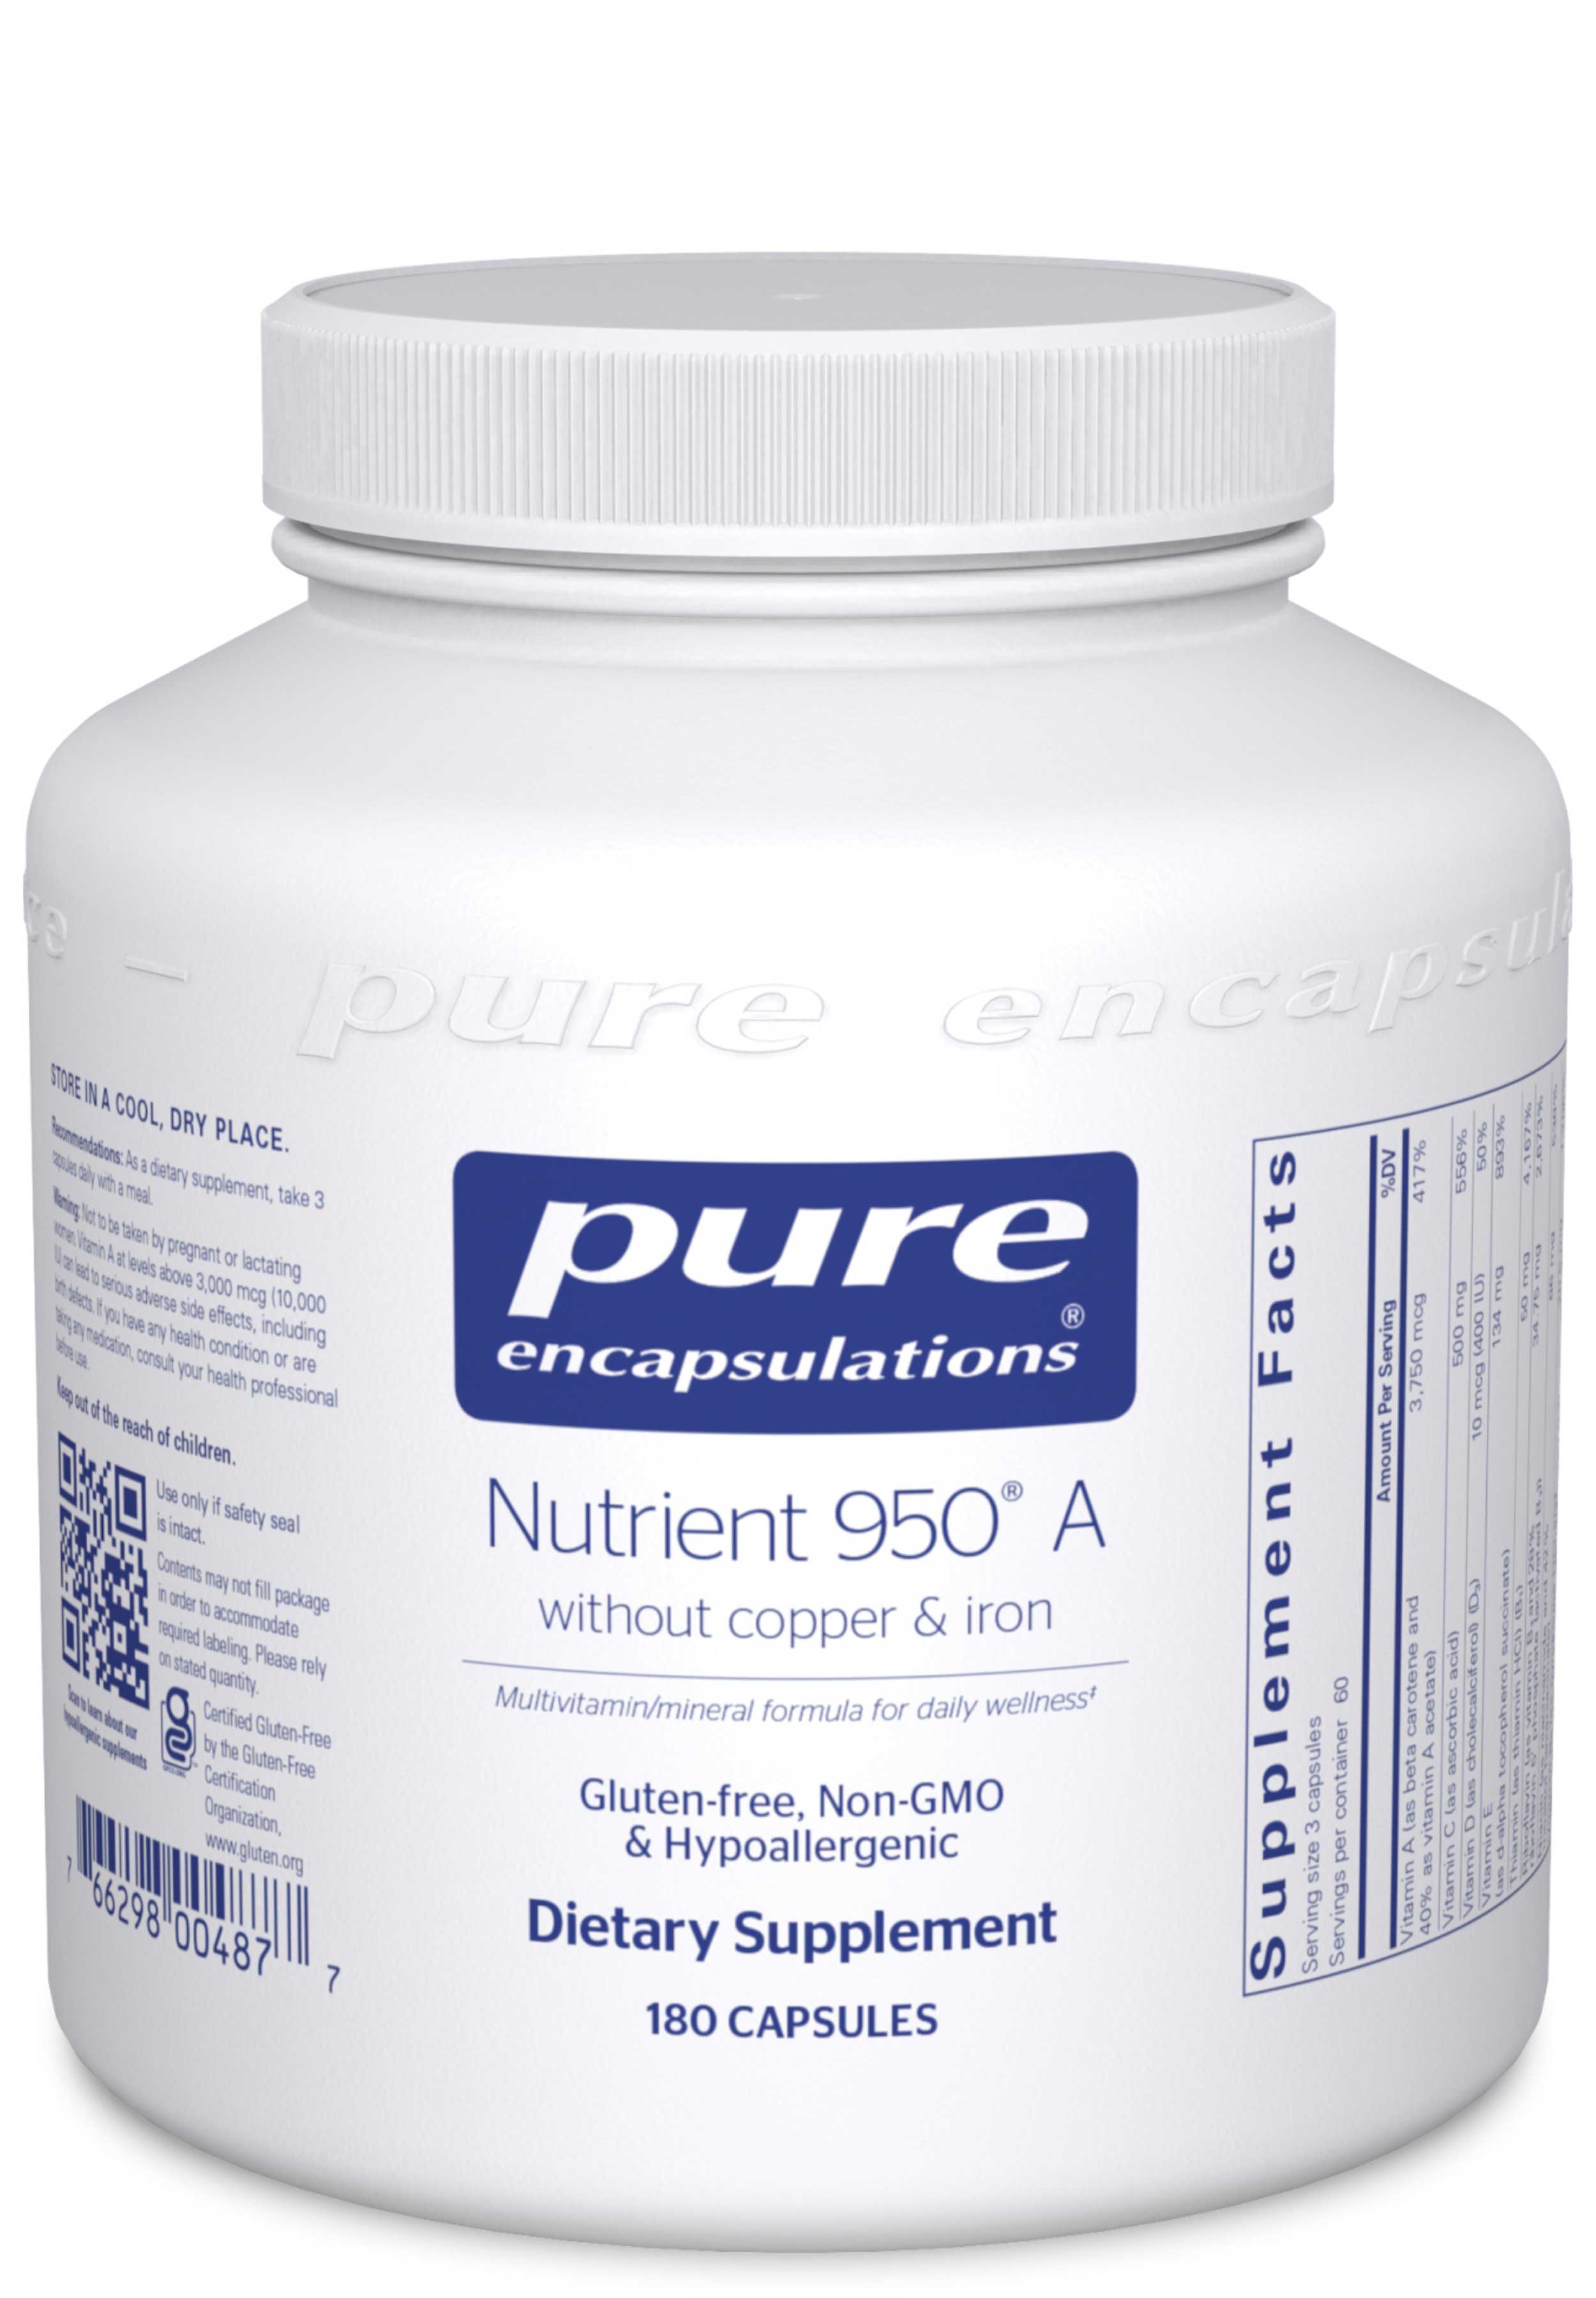 Pure Encapsulations Nutrient 950 A without copper & iron